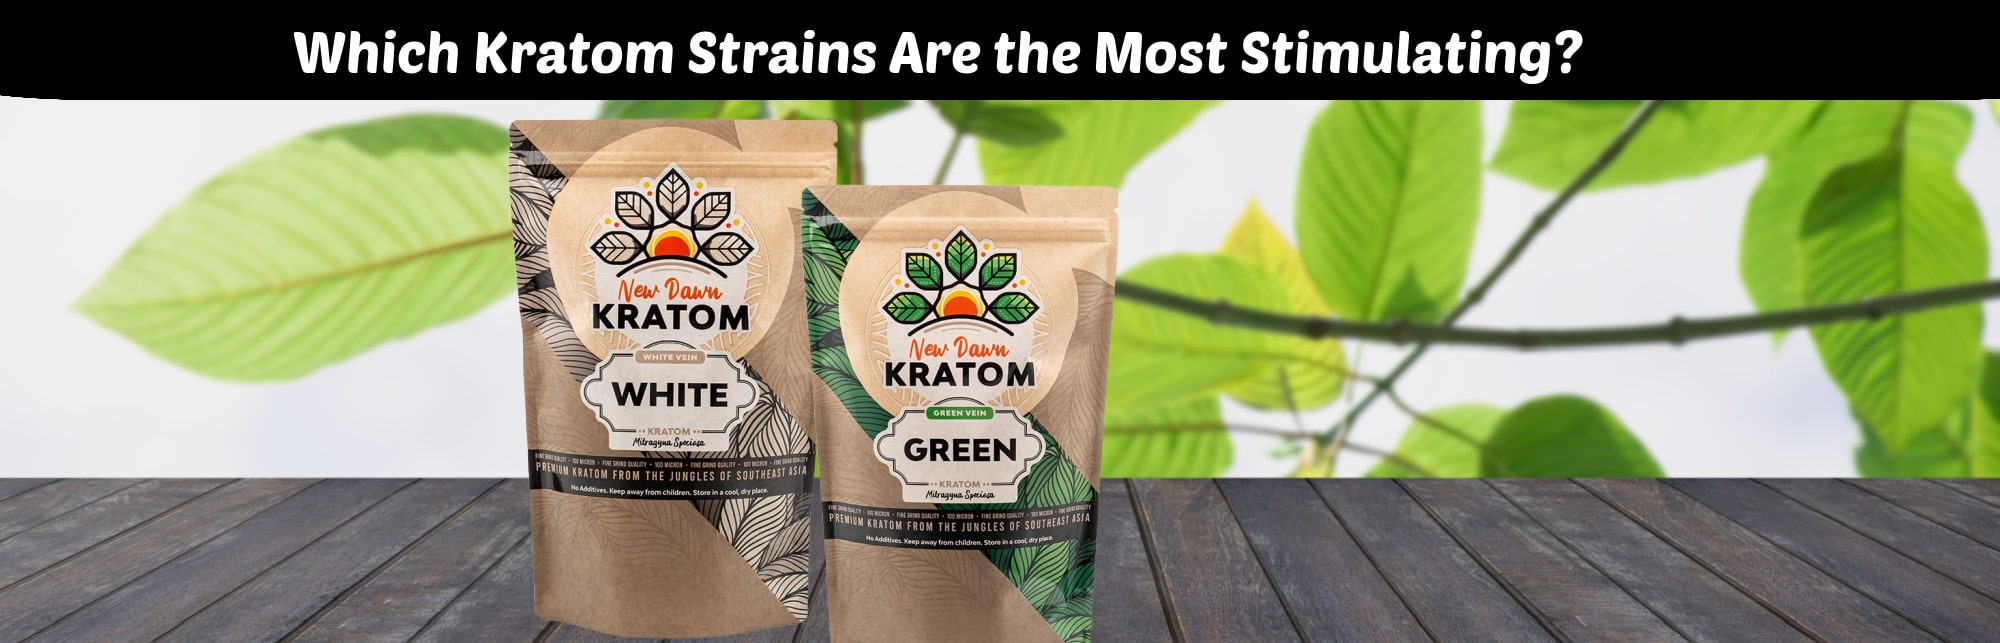 image of which kratom strains are most stimulating